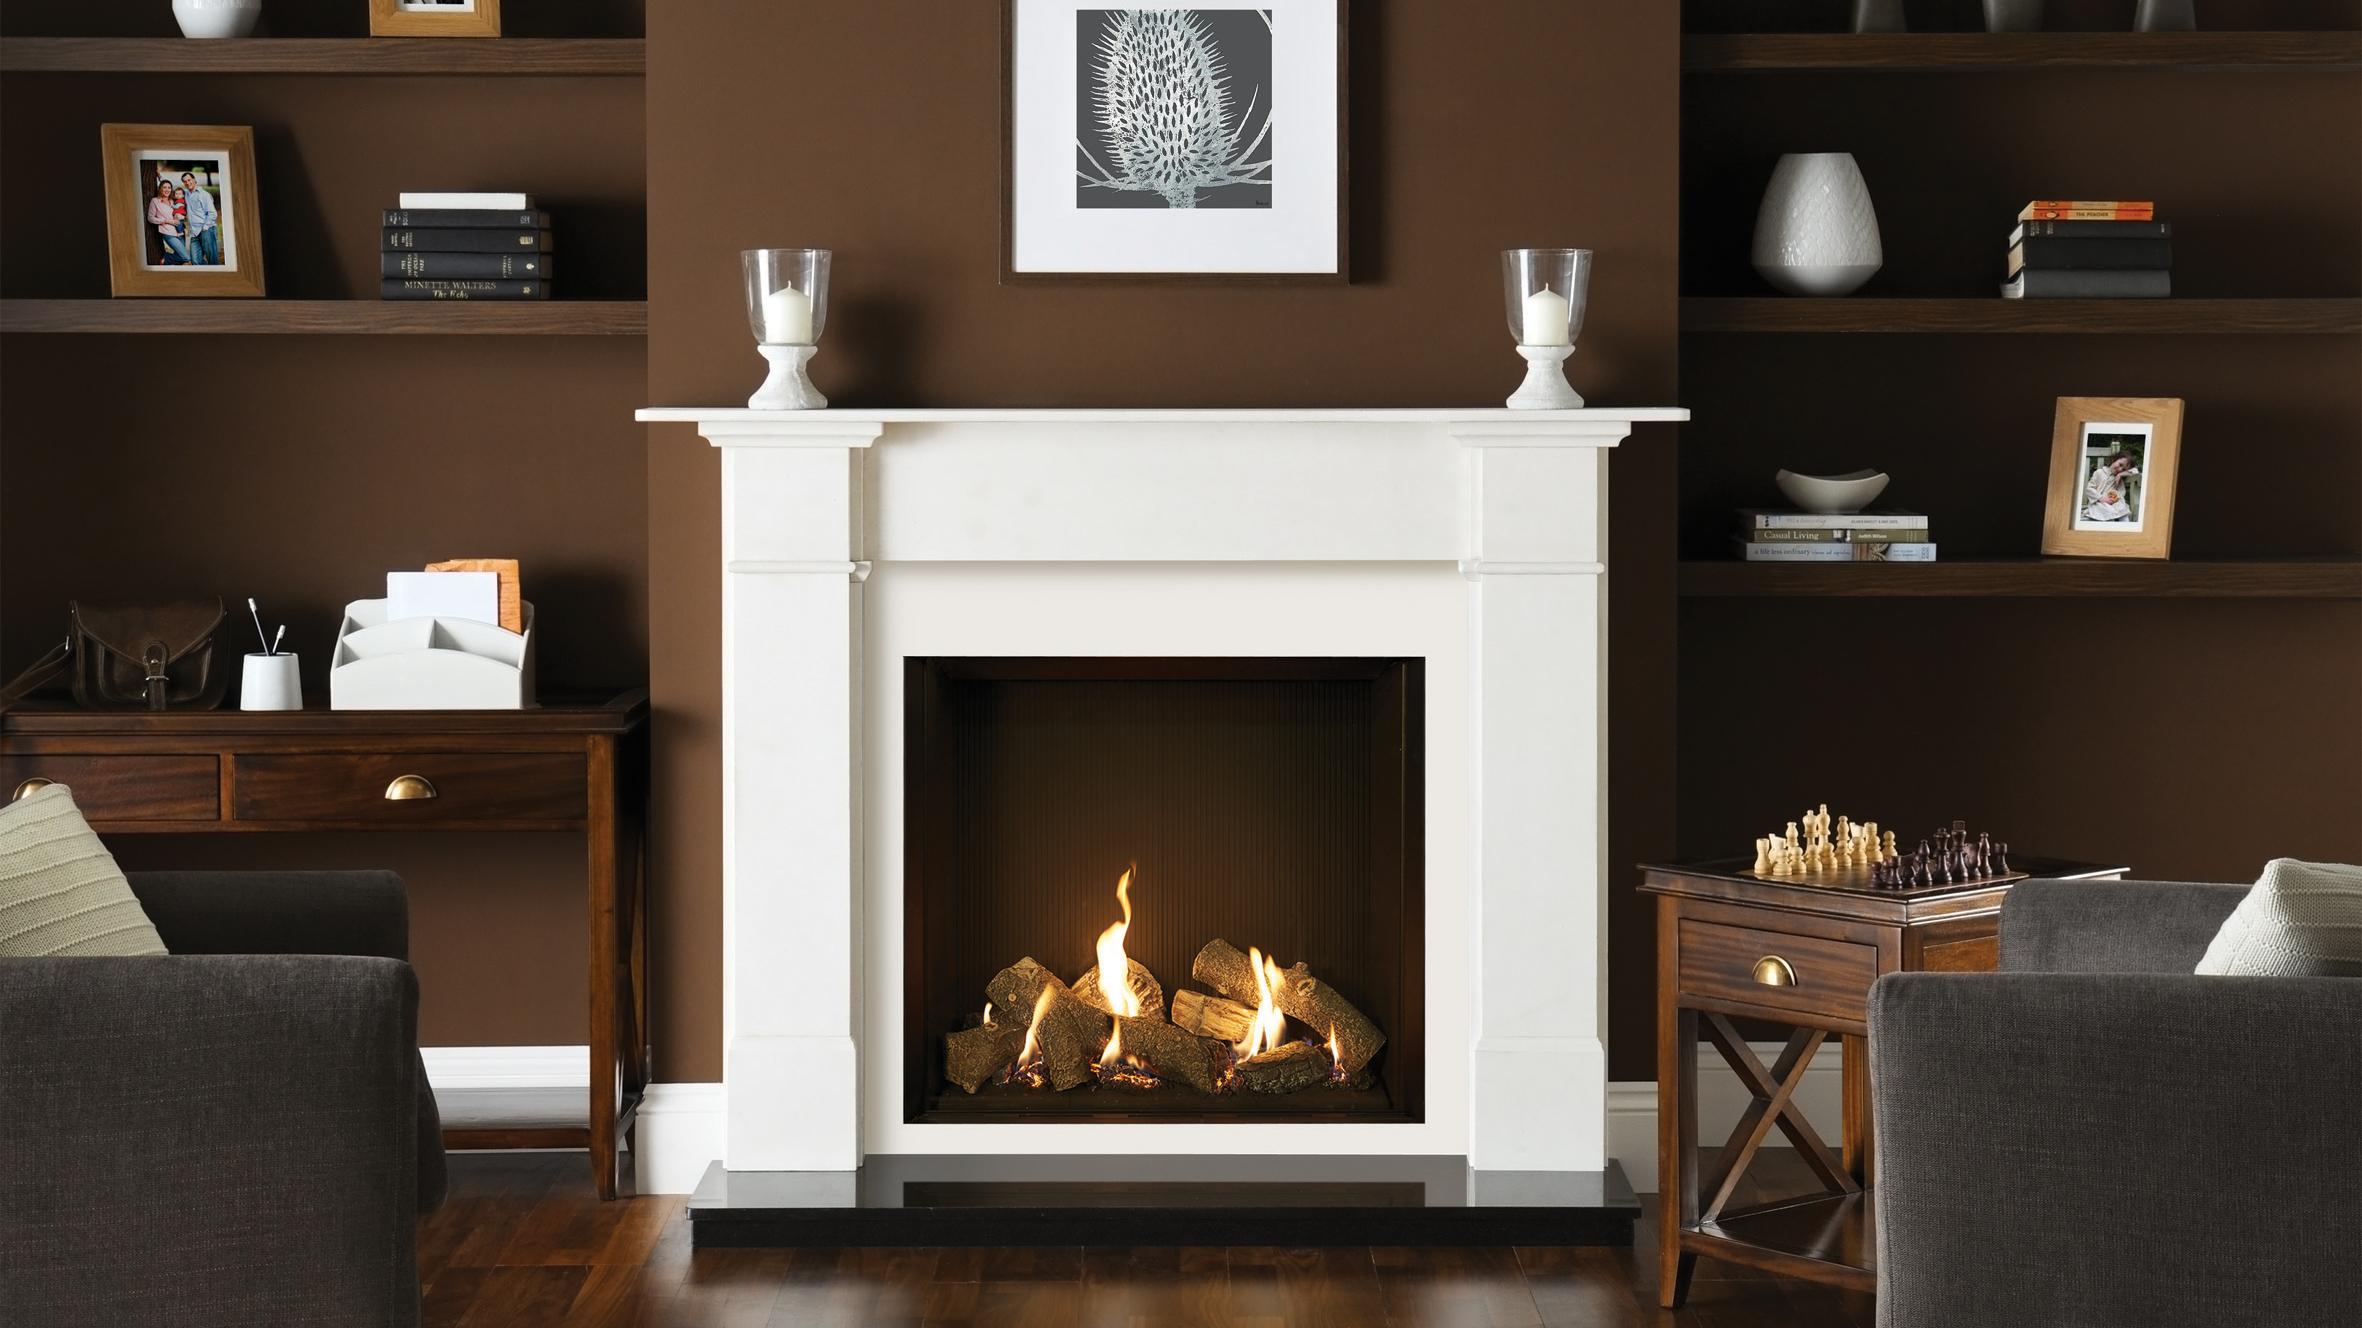  Riva2 750HL Gas Fires